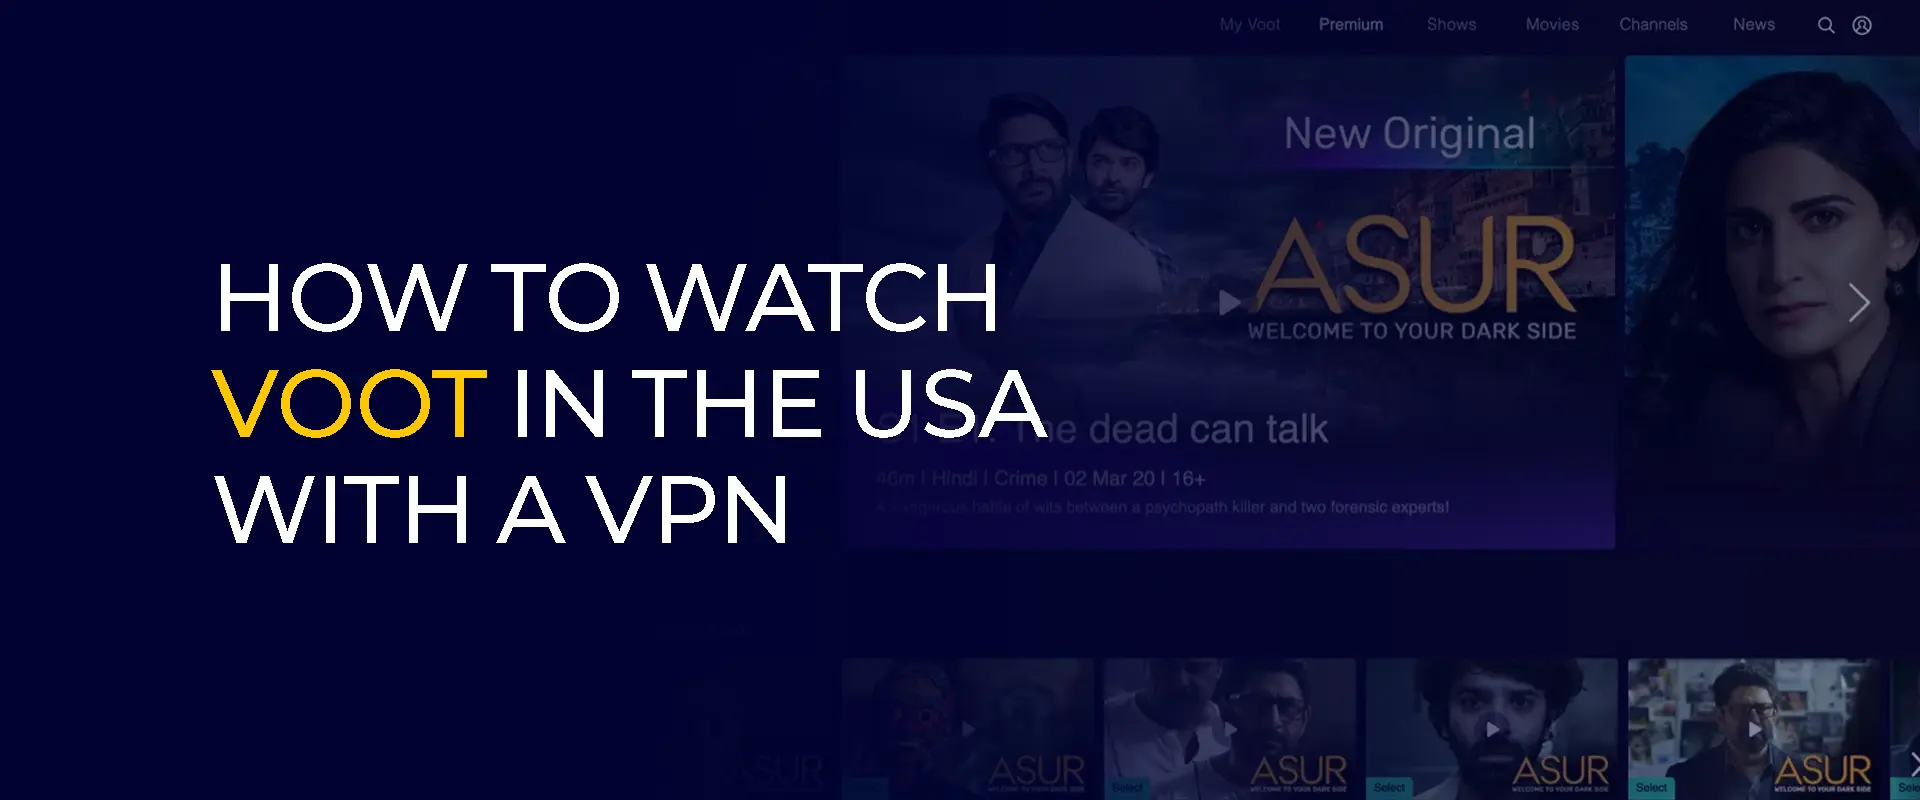 How to Watch Voot in the USA With a VPN